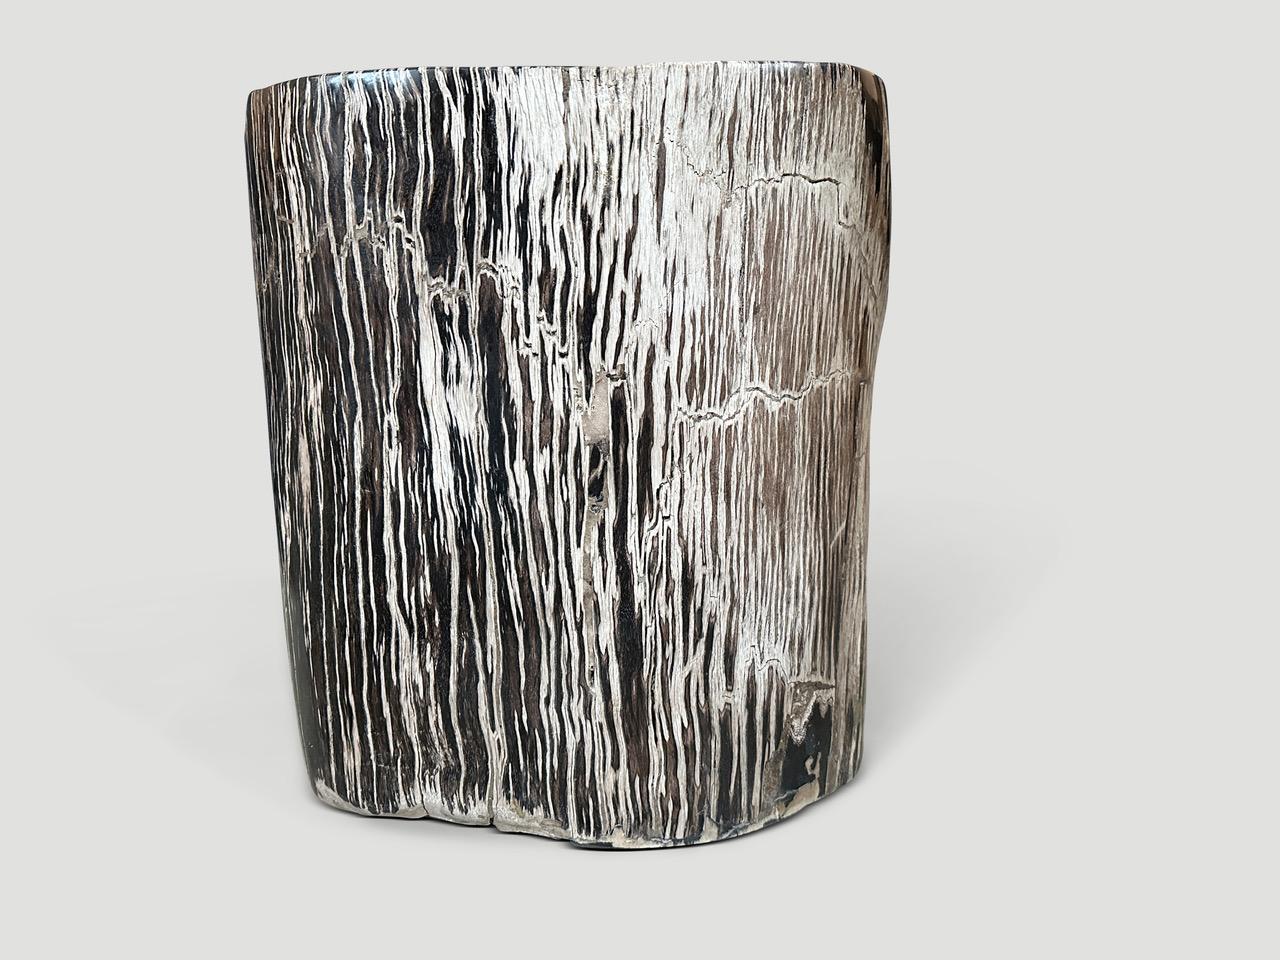 Impressive beautiful contrasting tones on this high quality striking petrified wood side table. It’s fascinating how Mother Nature produces these stunning 40 million year old petrified teak logs with such contrasting colors and natural patterns